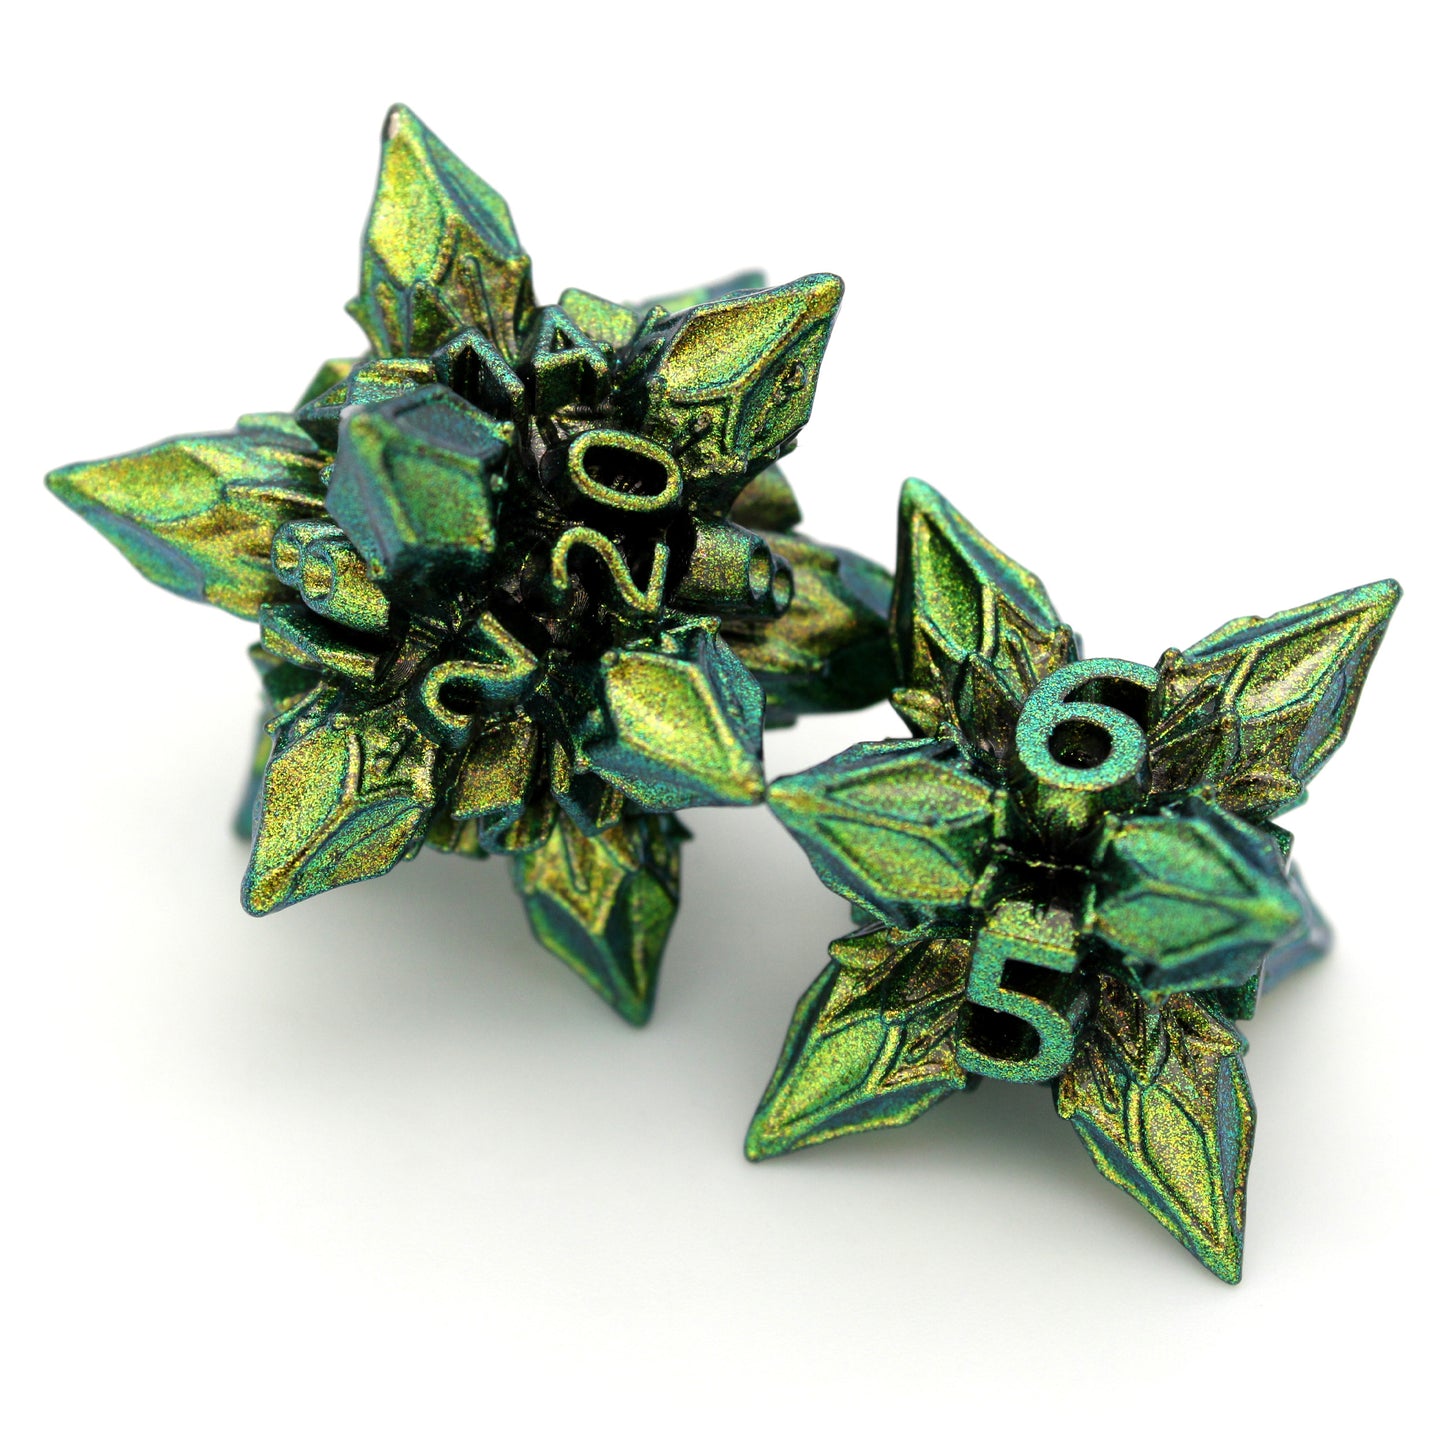 Thorn Whip is a 7-piece set of green and gold color-shifting, extraordinarily pointy metal dice. Roll with care.